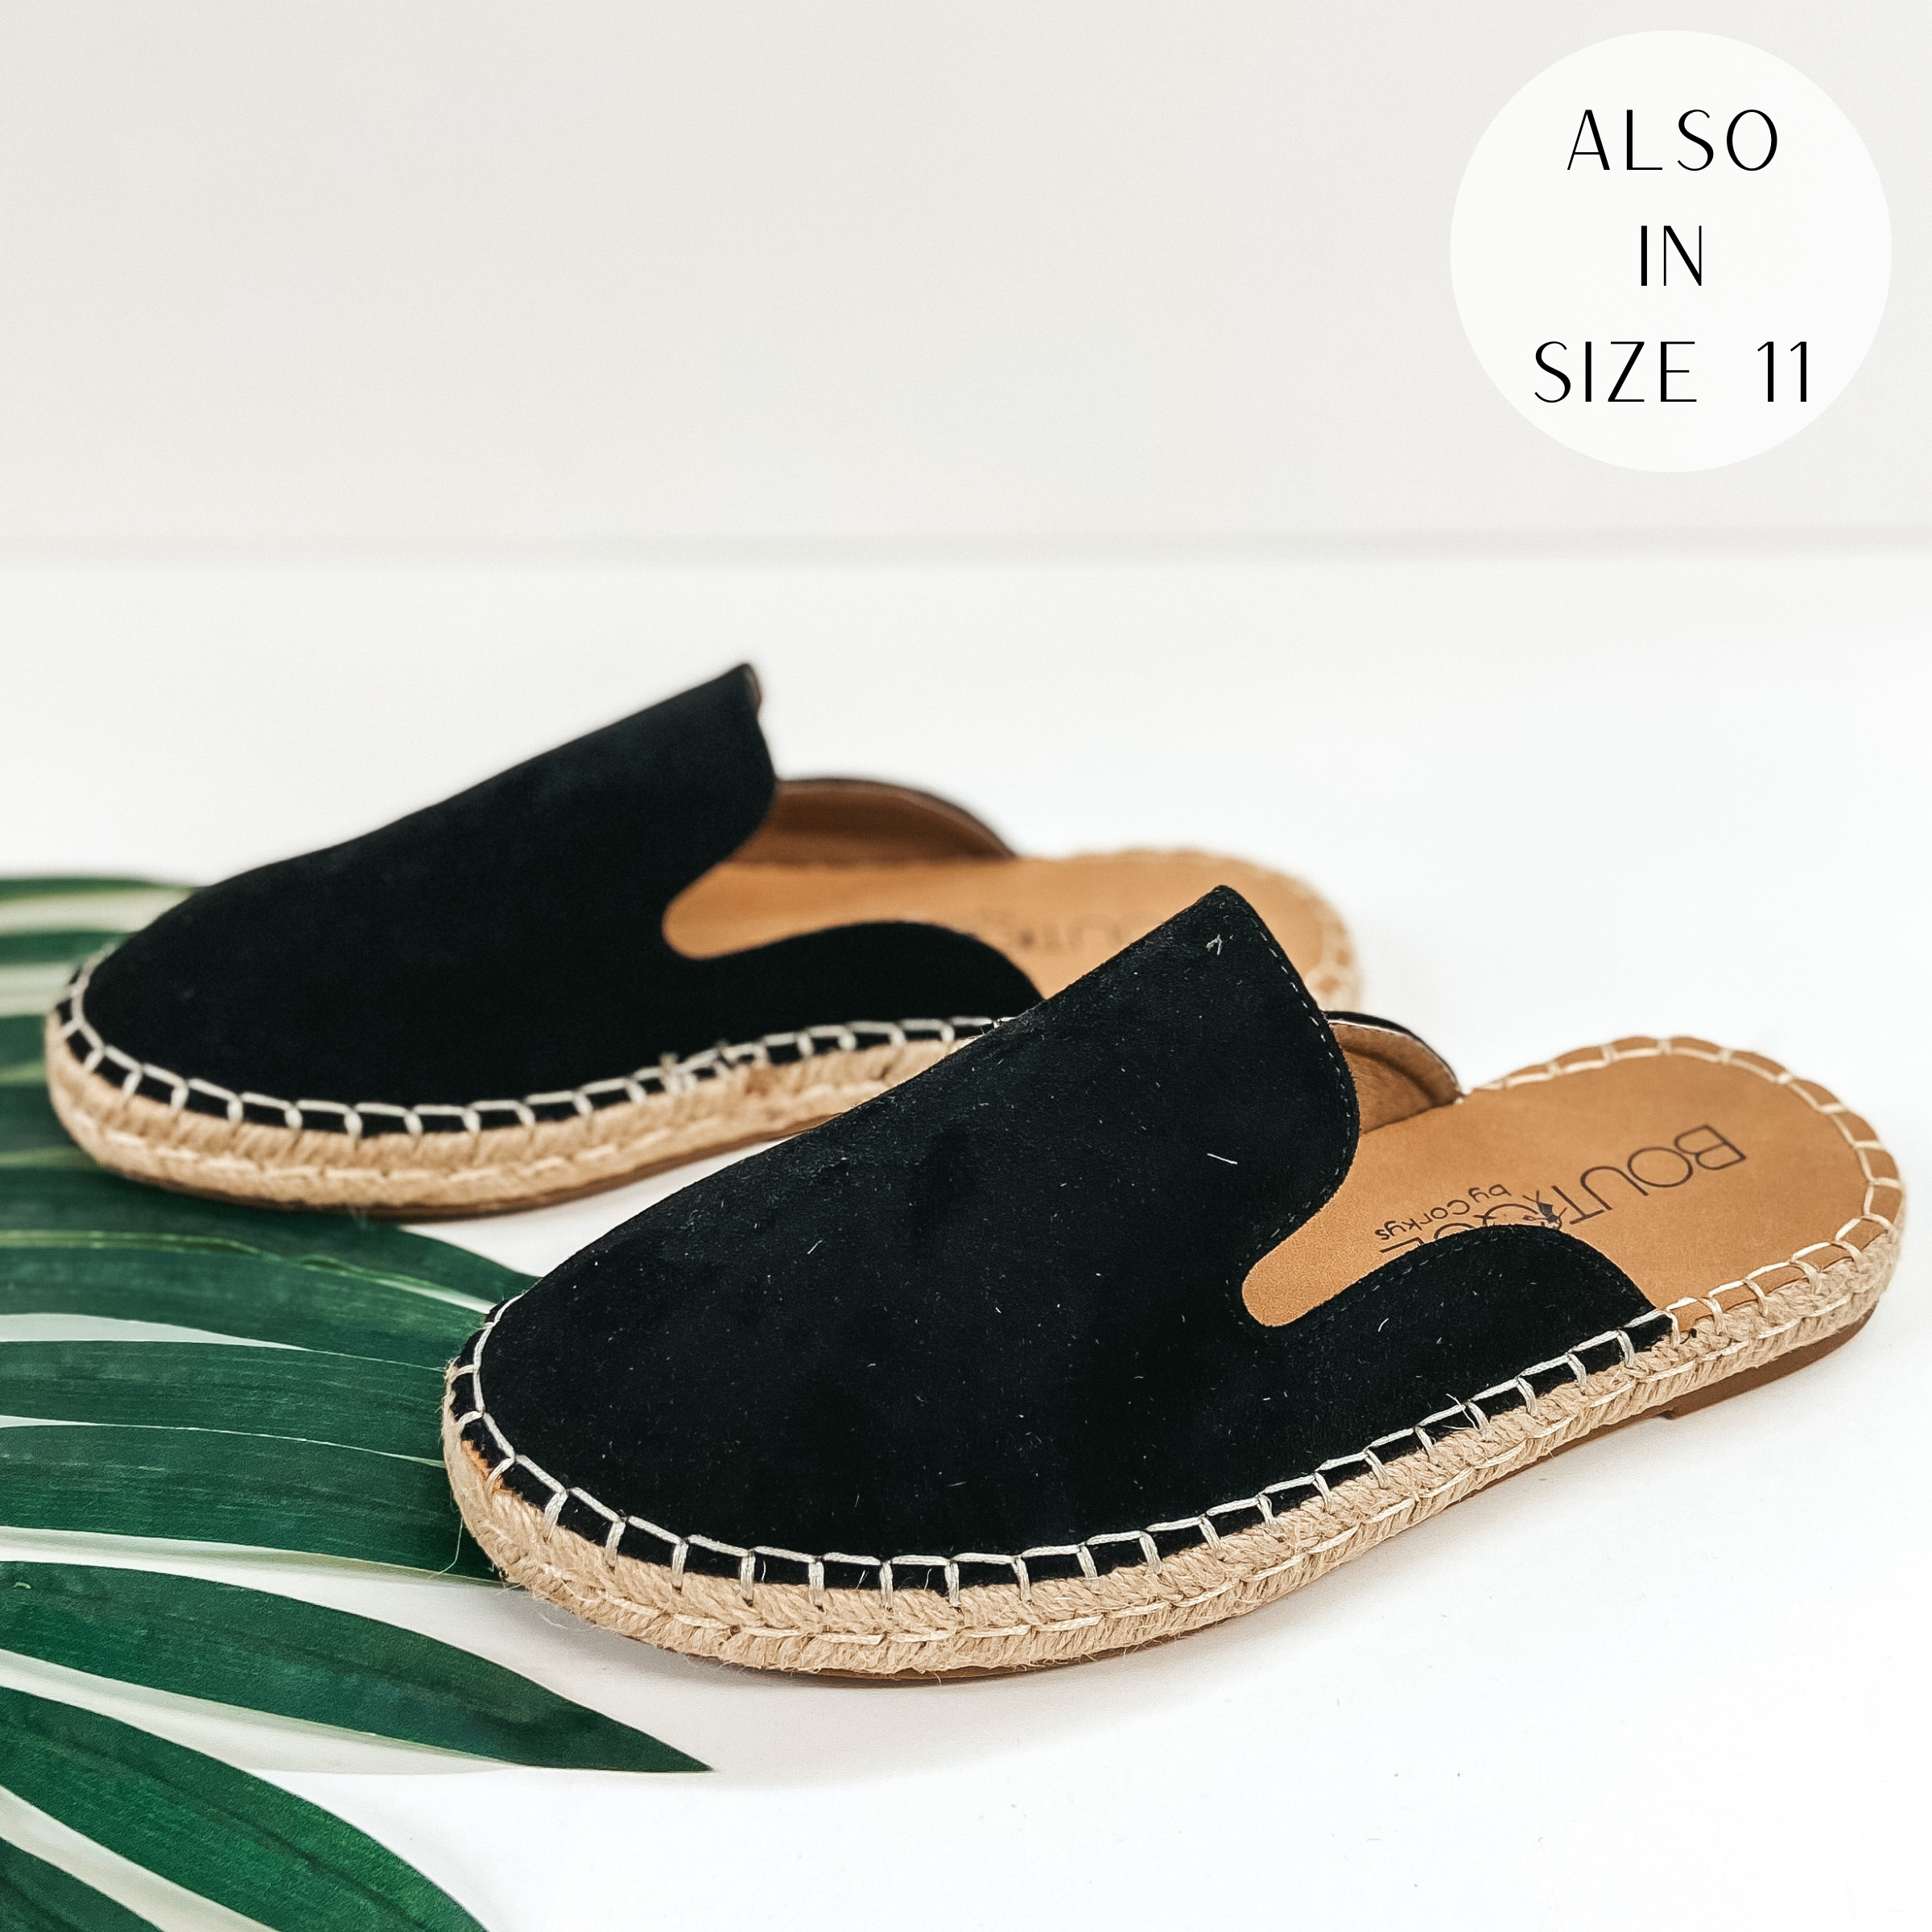 A pair of slip on espadrille shoes that have a black upper. Pictured on white background with a green palm leaf.